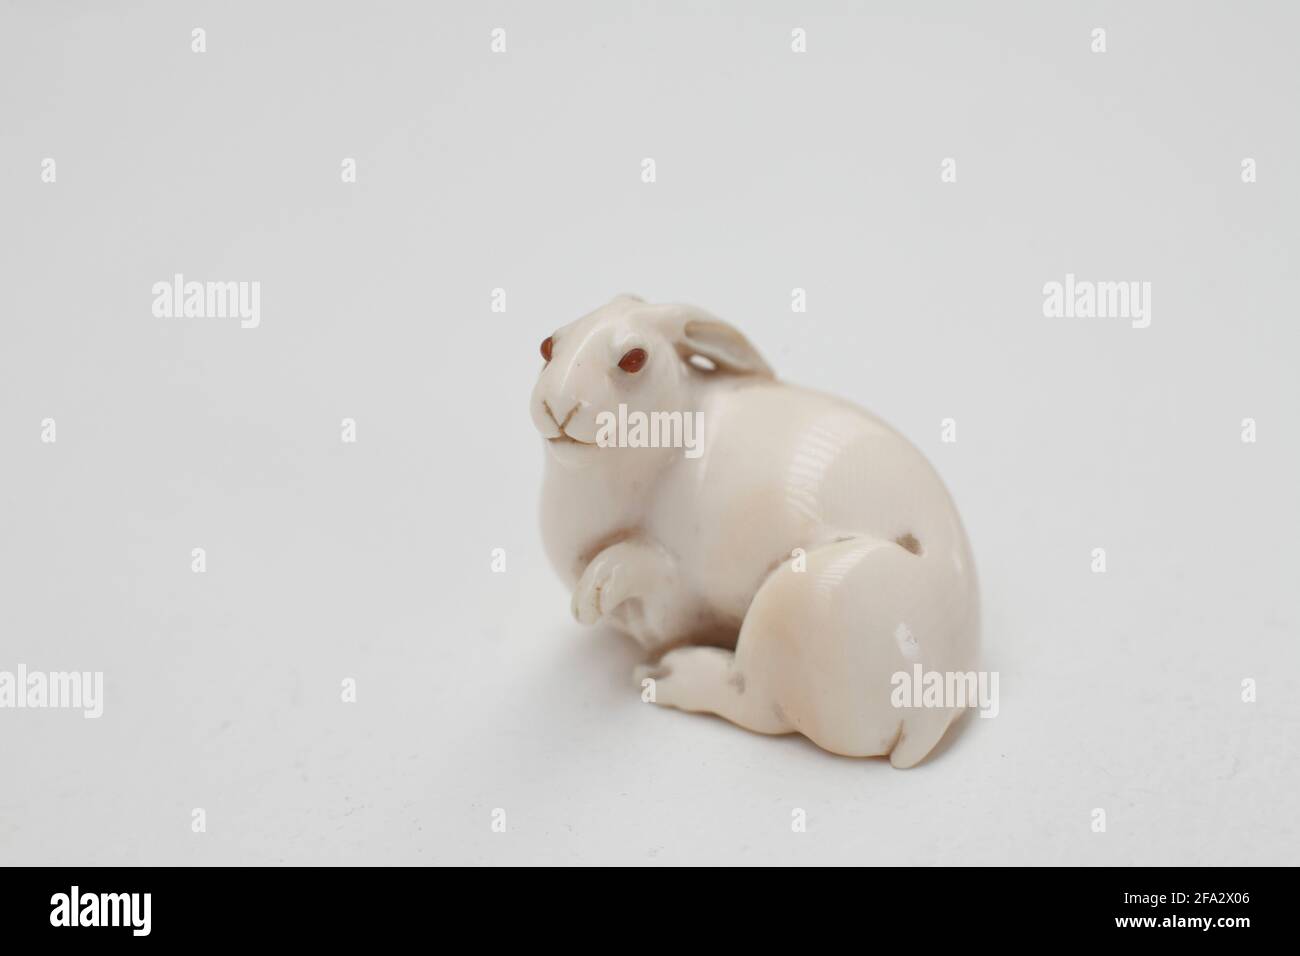 Natsuke , The Hare, belonging to Edmund De Waal , author of The Hare With Amber Eyes and ceramic artist photographed during an interview at his studio Stock Photo